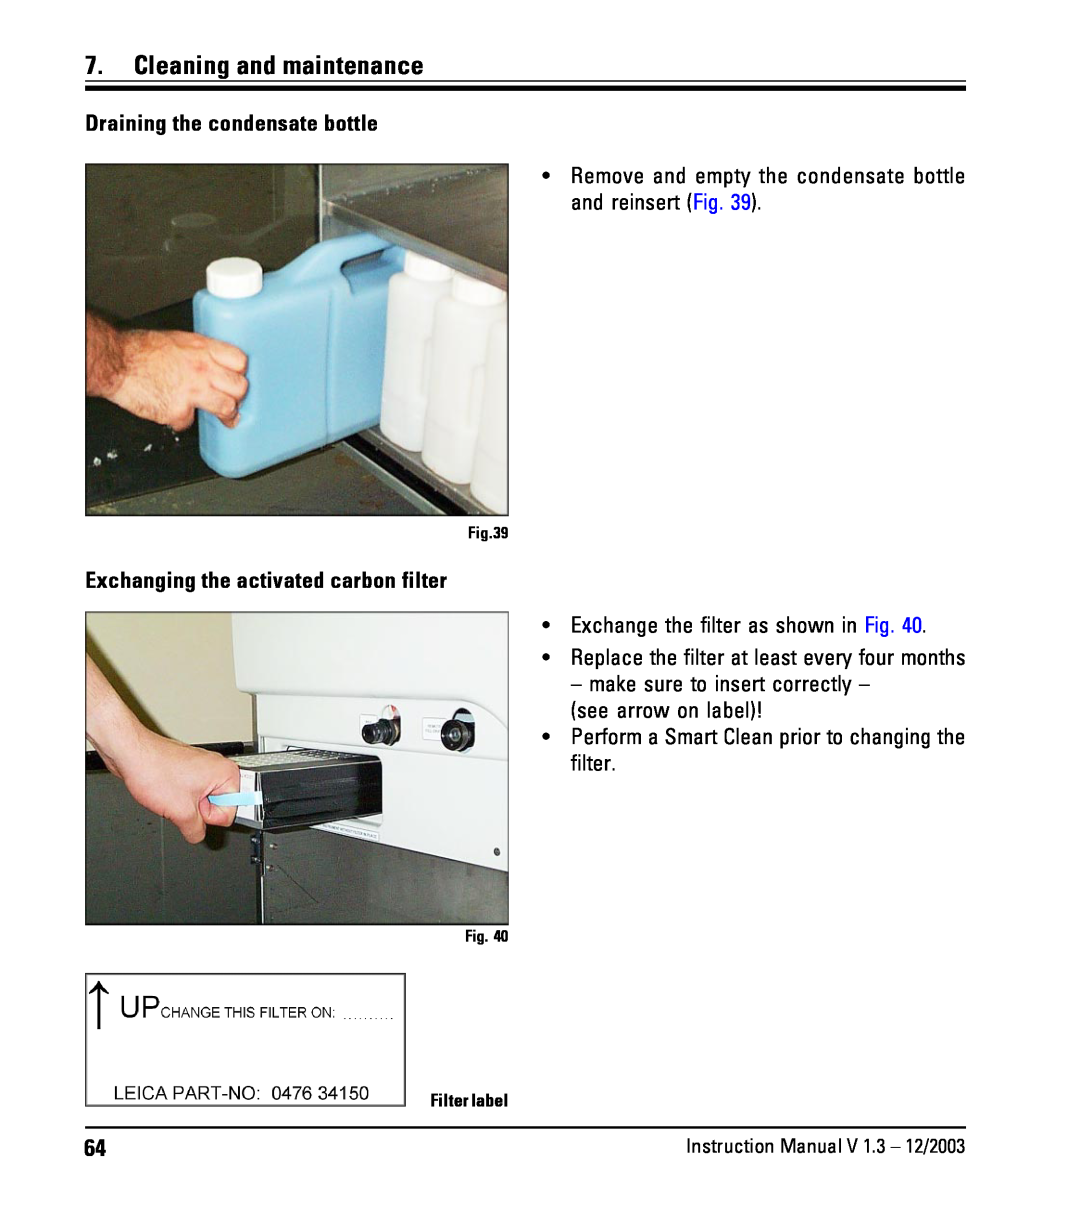 Leica ASP300 Cleaning and maintenance, Draining the condensate bottle, Exchanging the activated carbon filter 